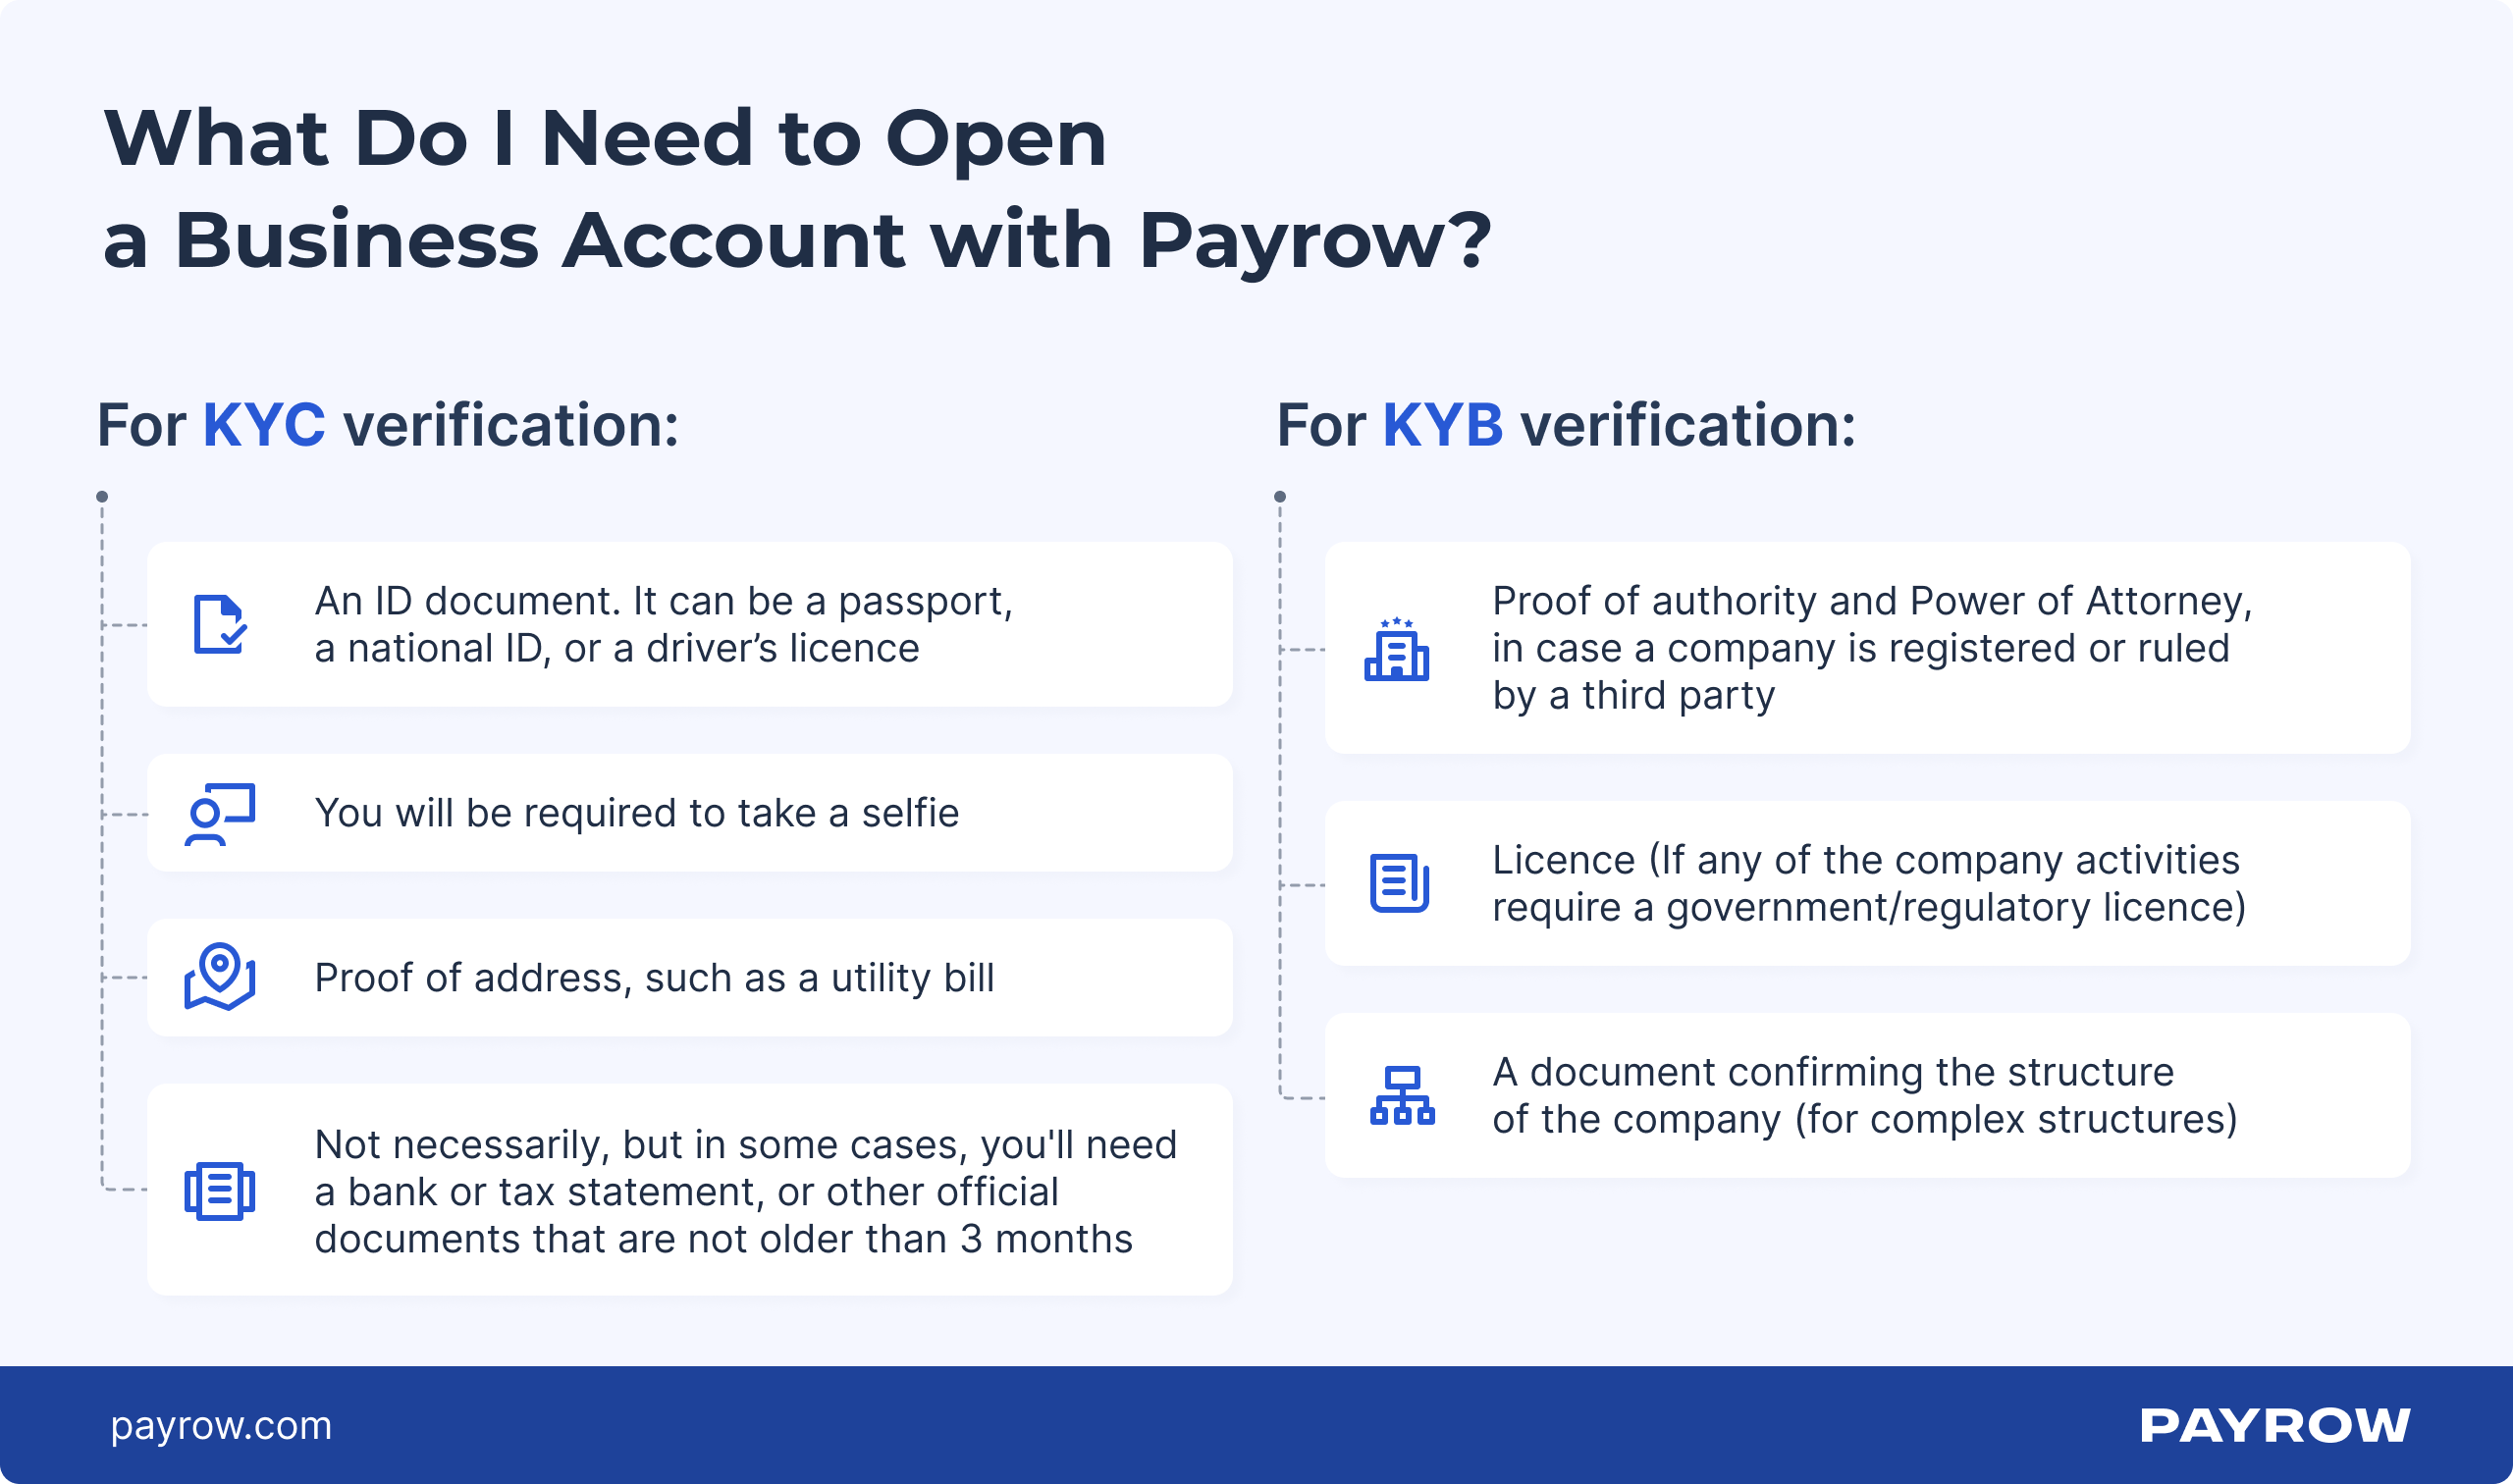 what do i need to open a business account with payrow in UK